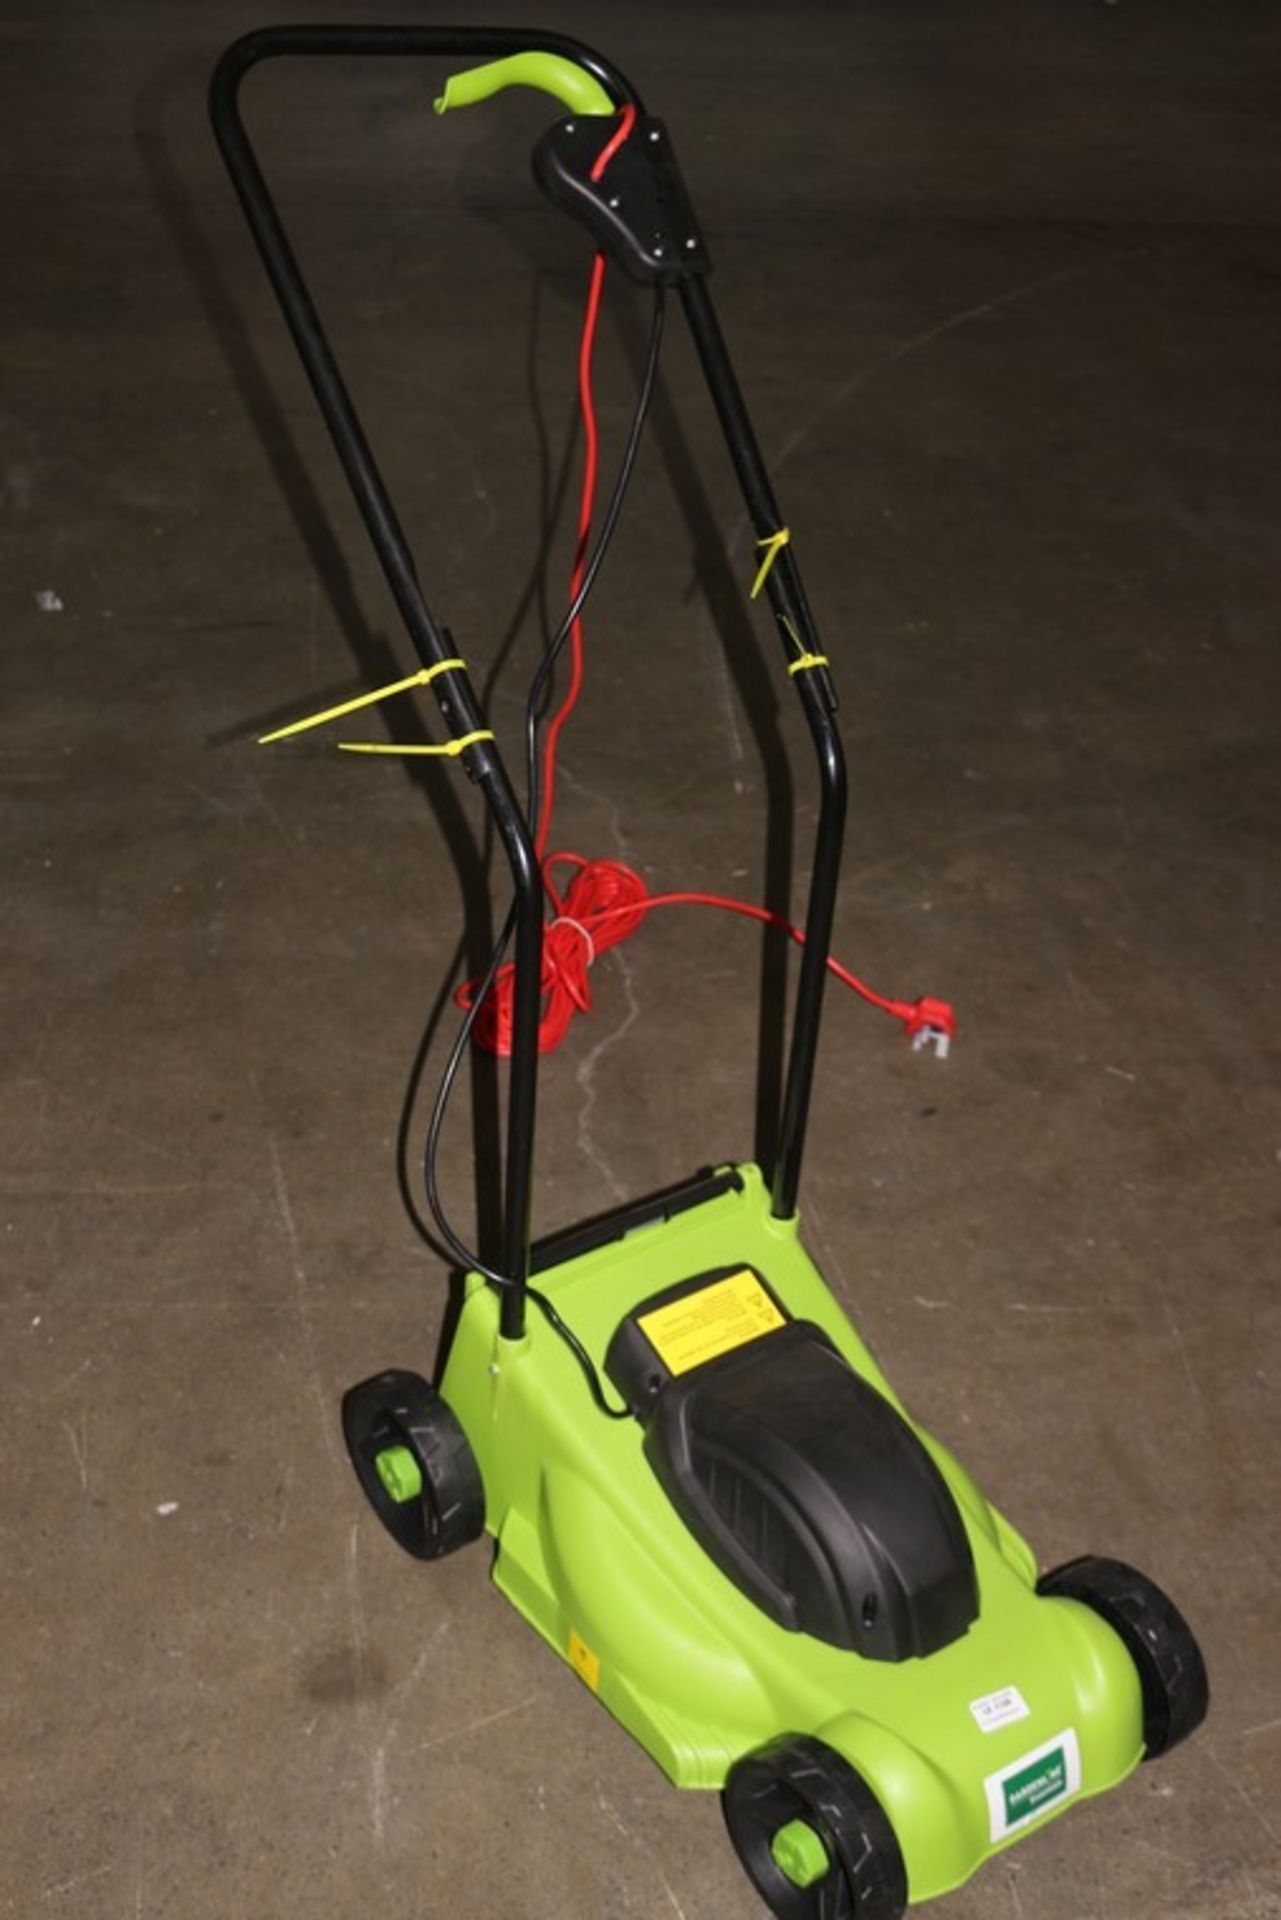 1 x GARDEN LINE 1000W LAWN MOWER (14.09.17) *PLEASE NOTE THAT THE BID PRICE IS MULTIPLIED BY THE